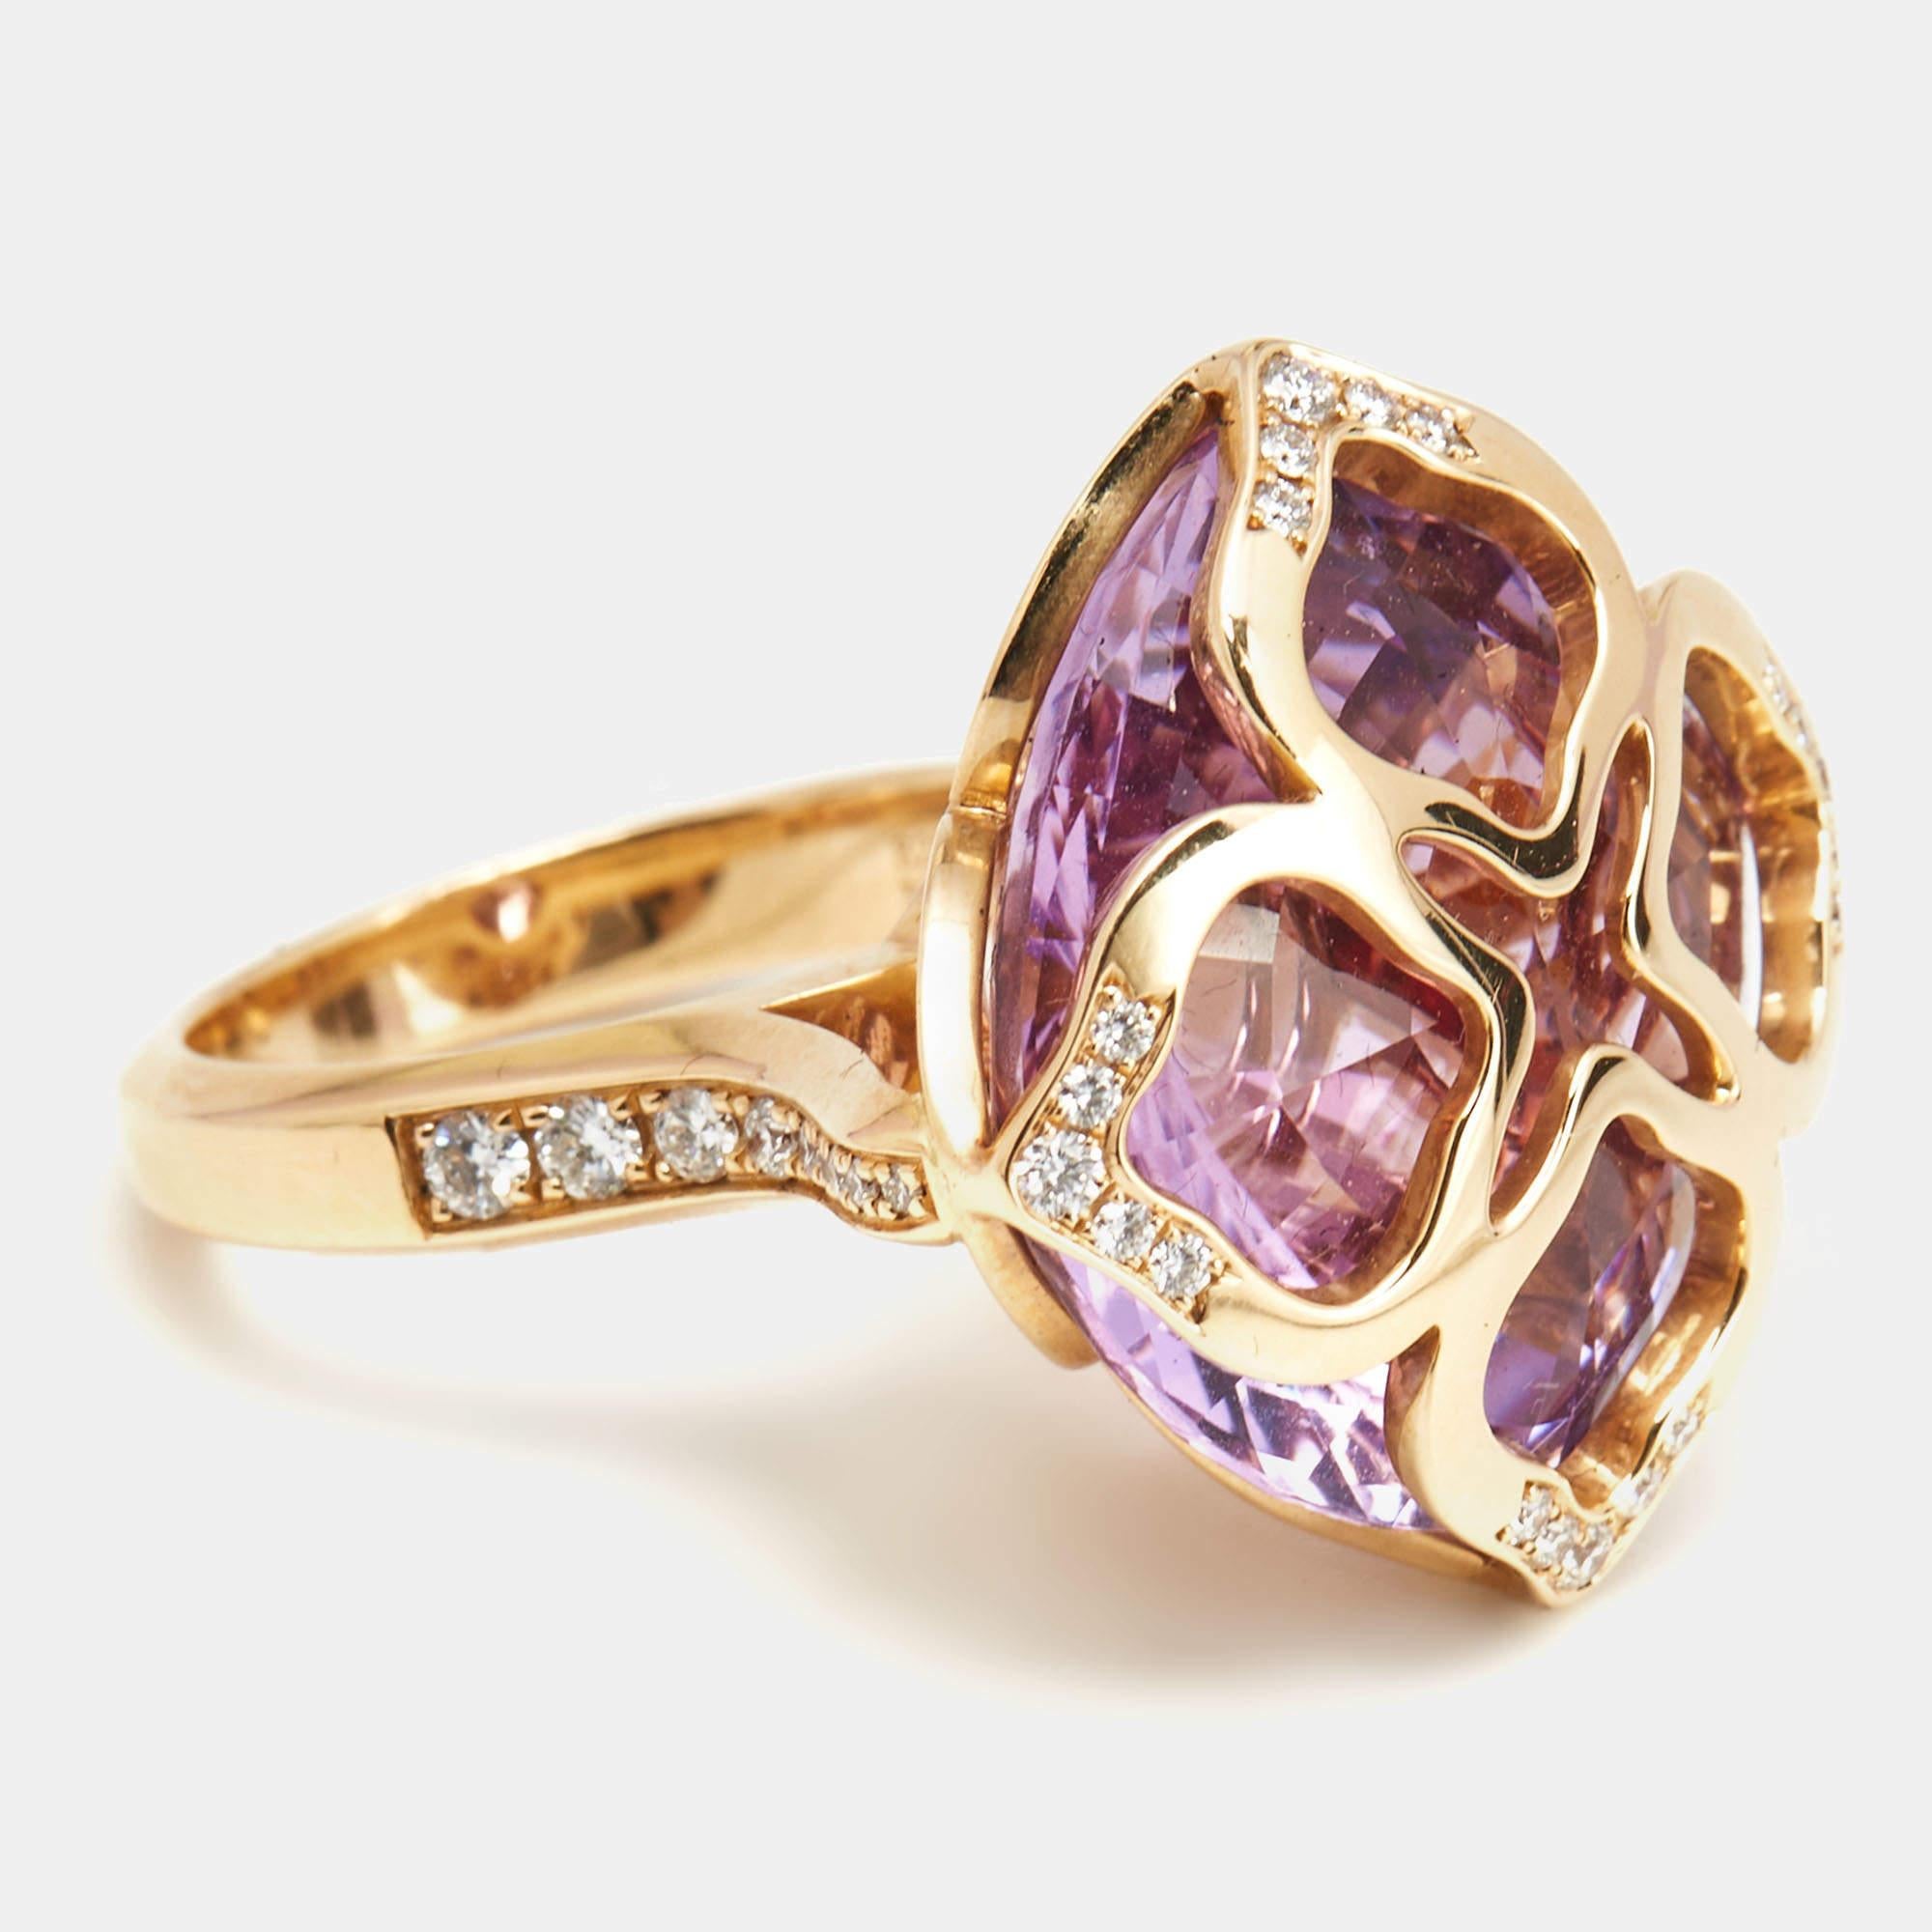 This Chopard cocktail ring from the Imperiale collection is a creation of joy. It comes to life through 18K rose gold. The smooth band holds a gorgeously-designed head featuring awe-inspiring openwork with diamonds and amethyst. The amazing